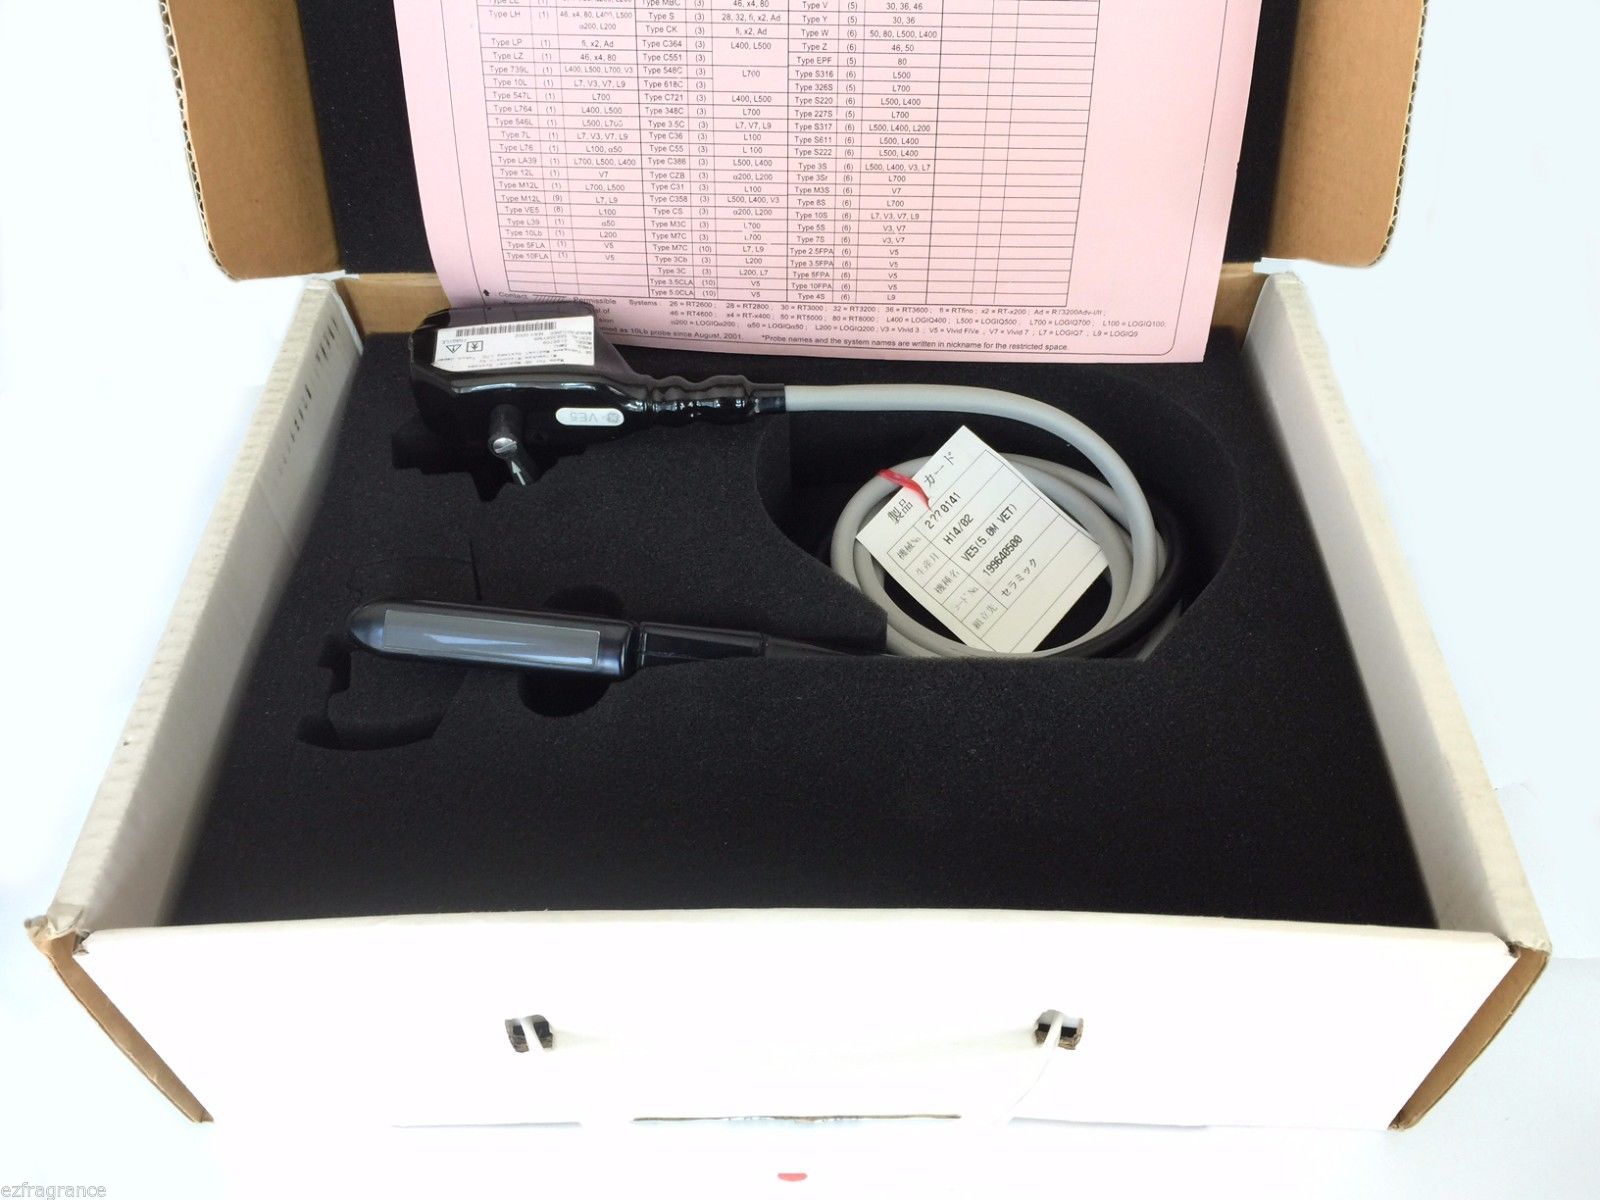 GE VE5 Sidefire Linear/Rectal Probe for the LOGIQ 100 and LOGIQ 100 PRO DIAGNOSTIC ULTRASOUND MACHINES FOR SALE